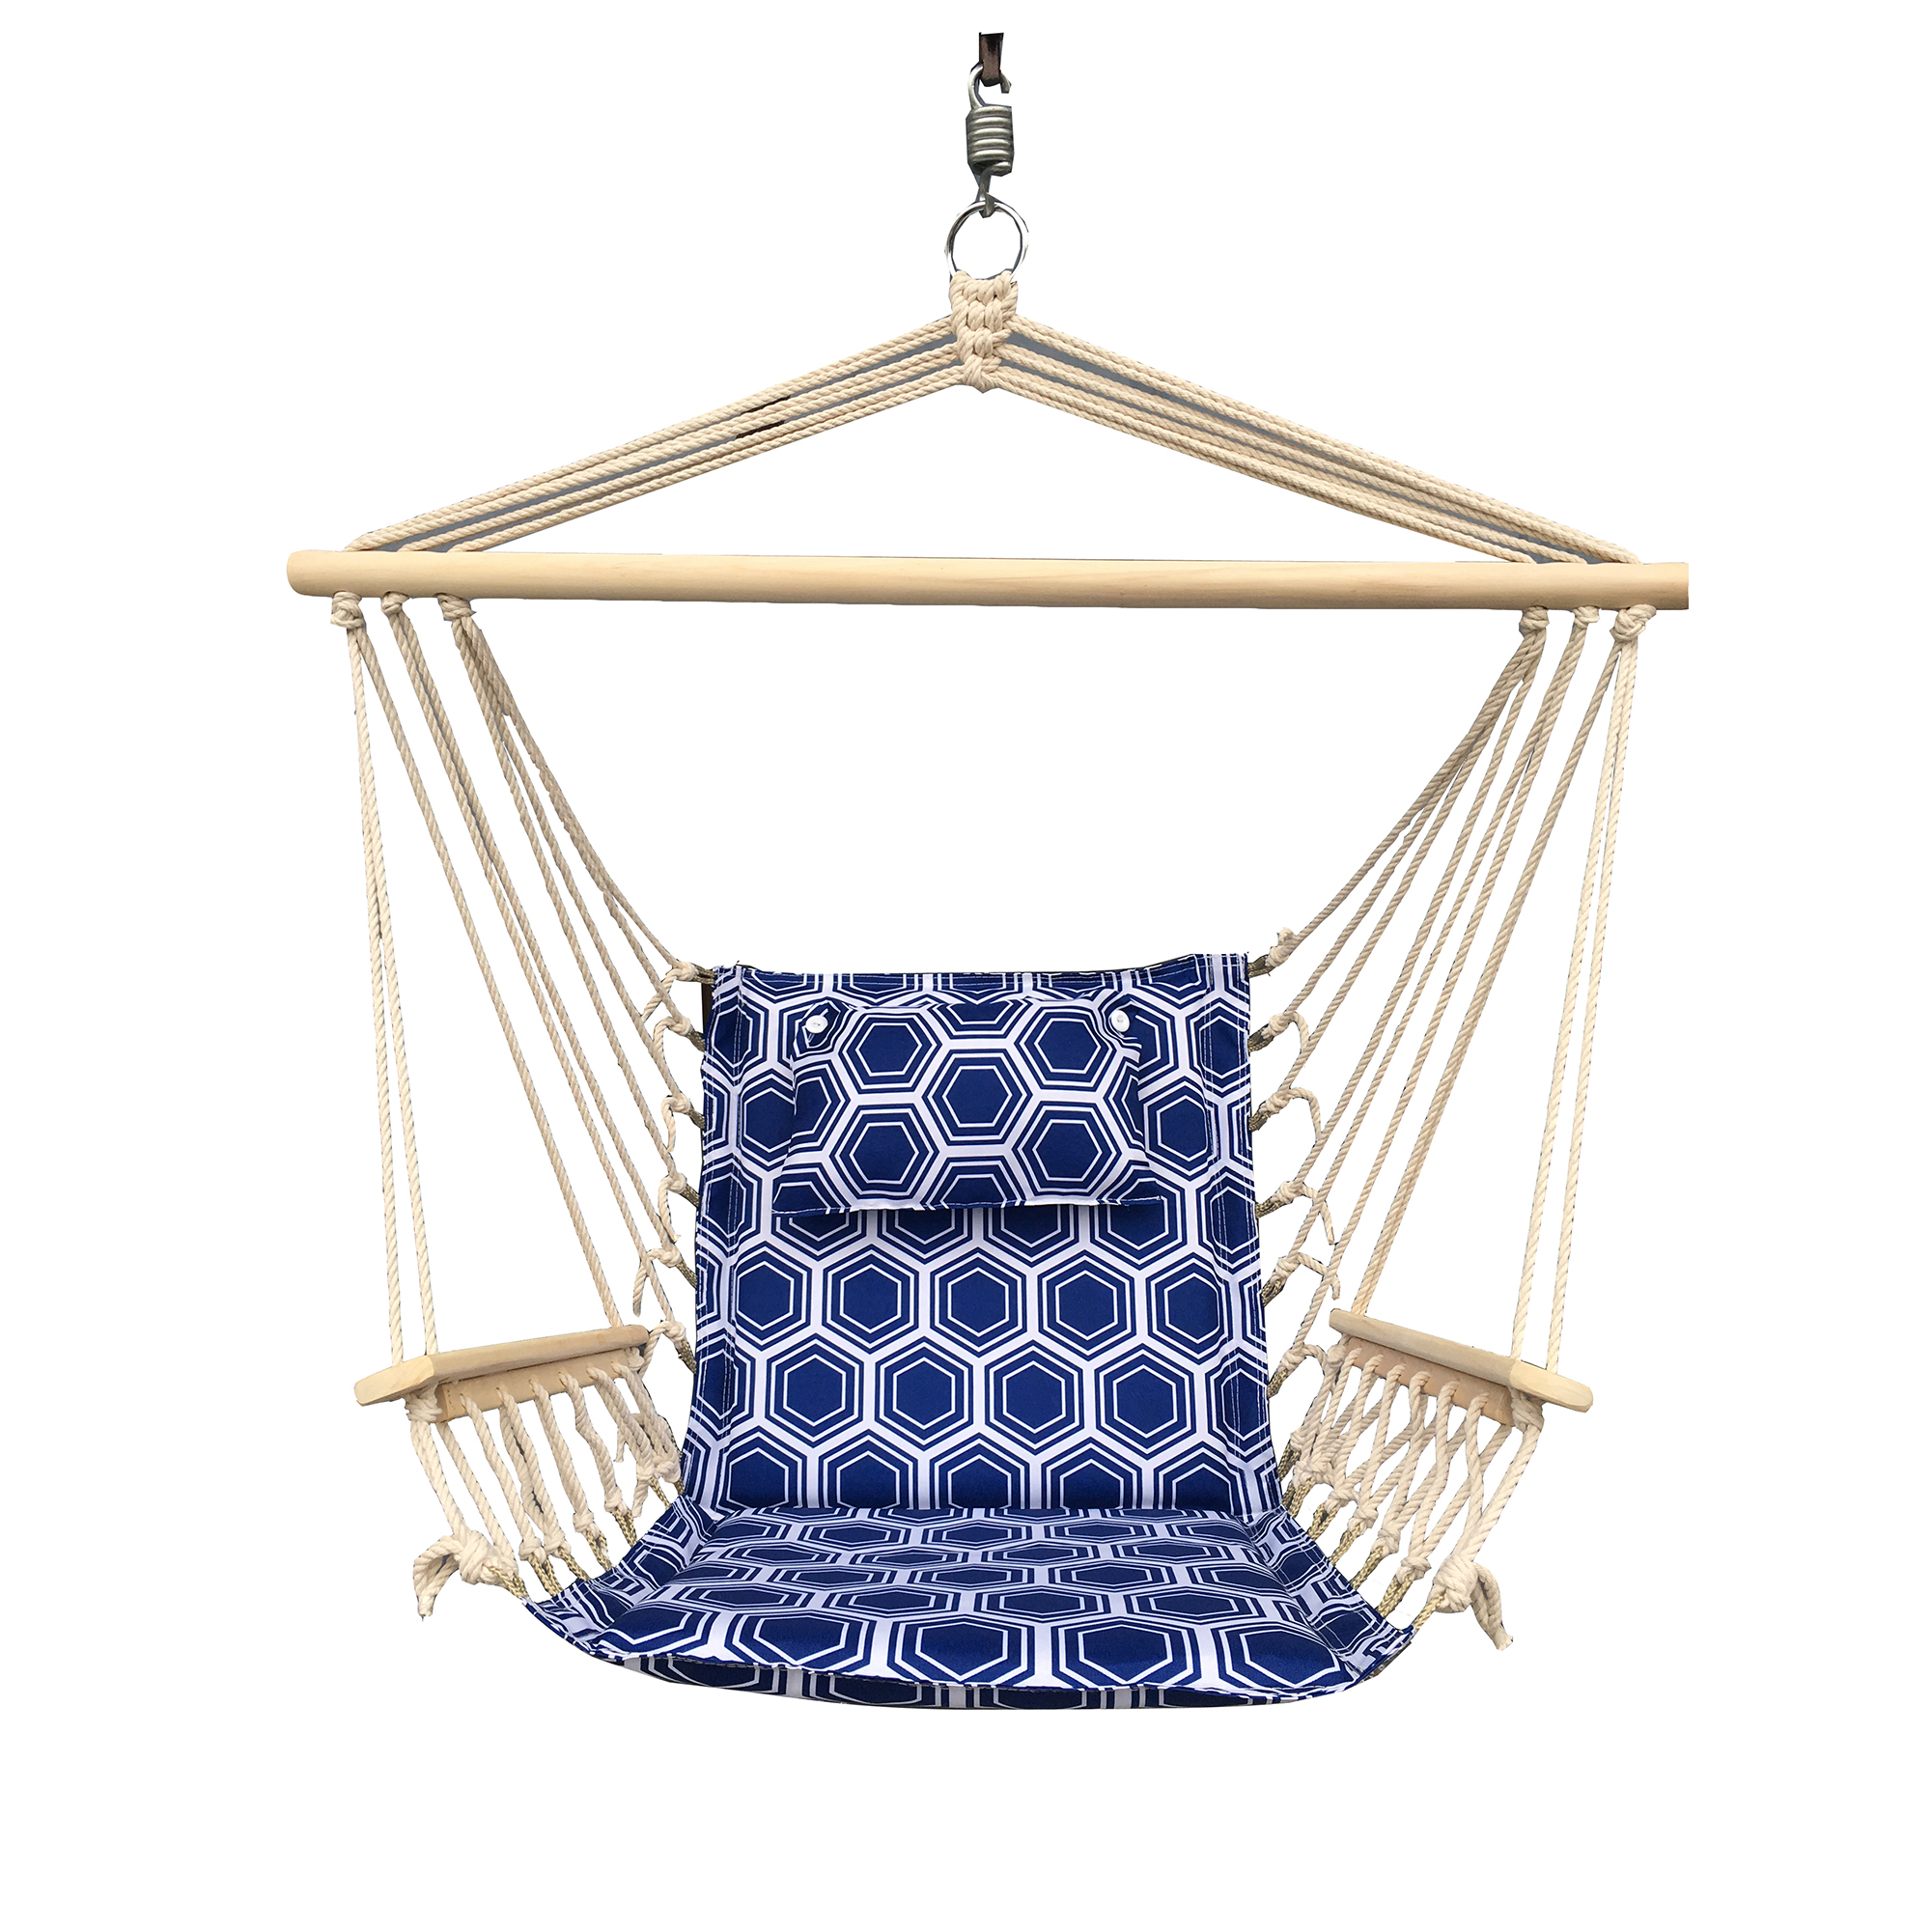 Hammock Chair with Stand - Blue w/ White Rings Pattern - image 1 of 2